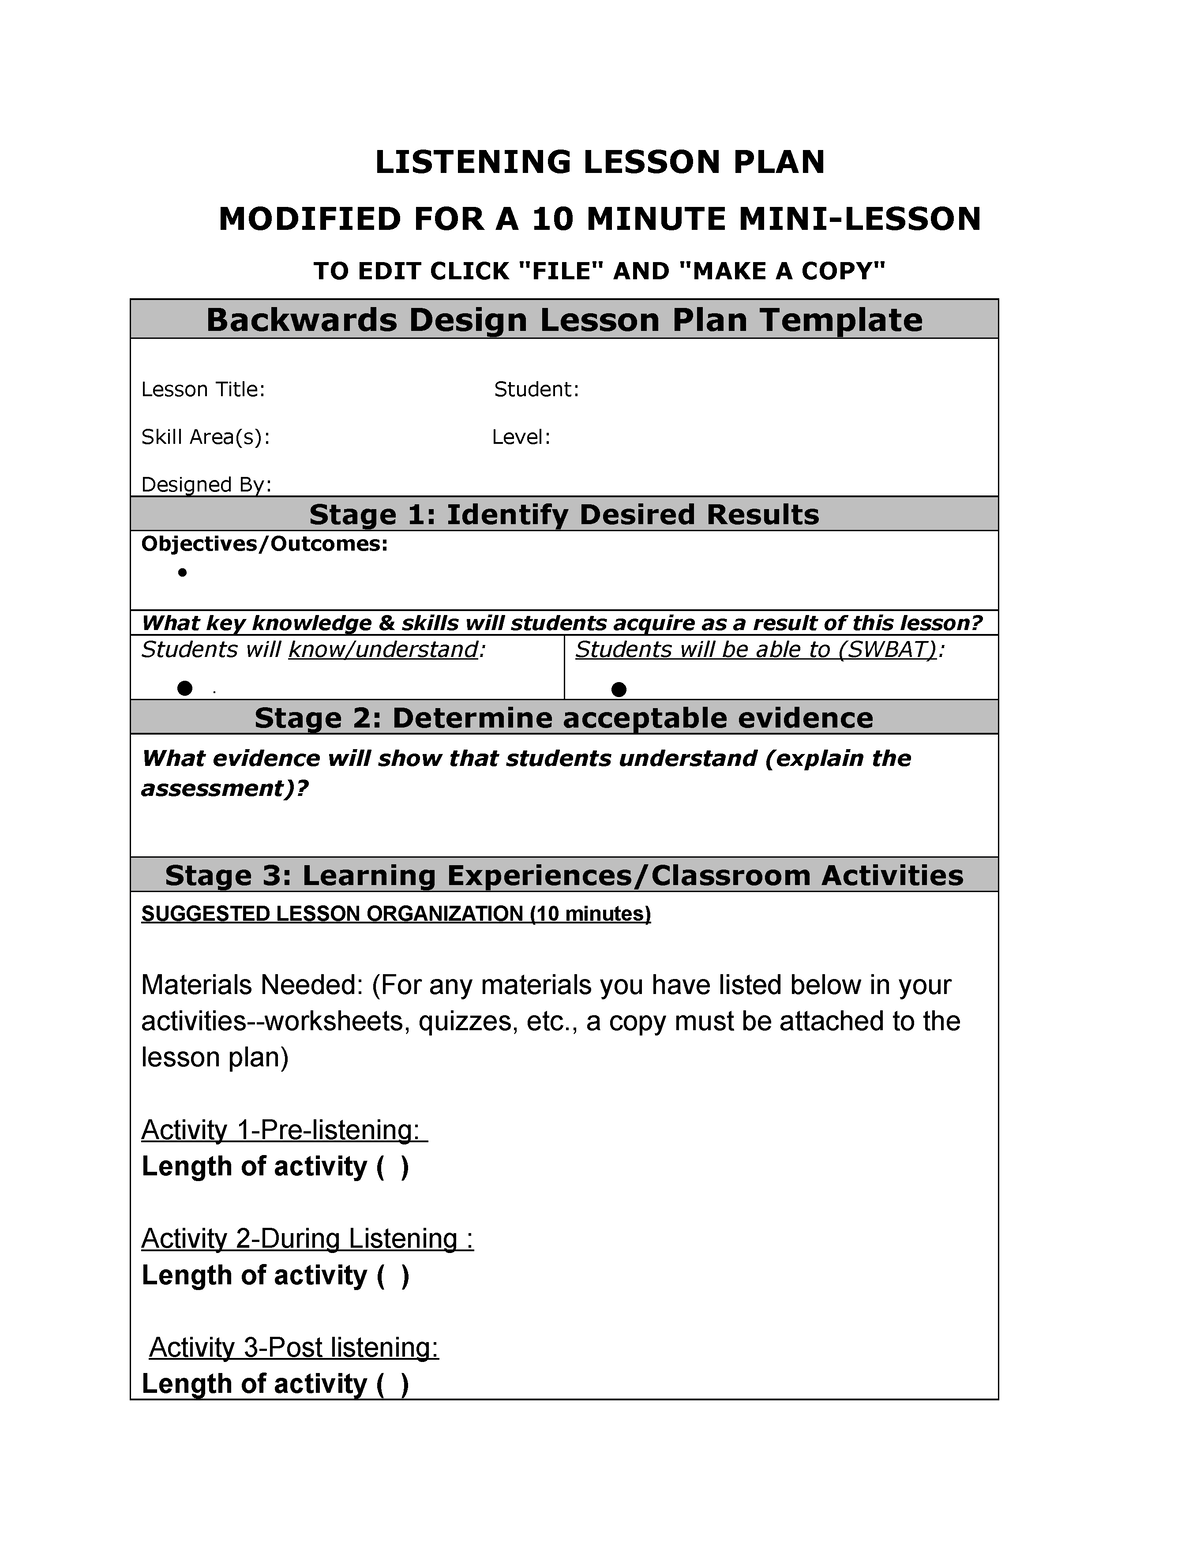 tesol-101-wk7-template-for-listening-lesson-plan-listening-lesson-plan-modified-for-a-10